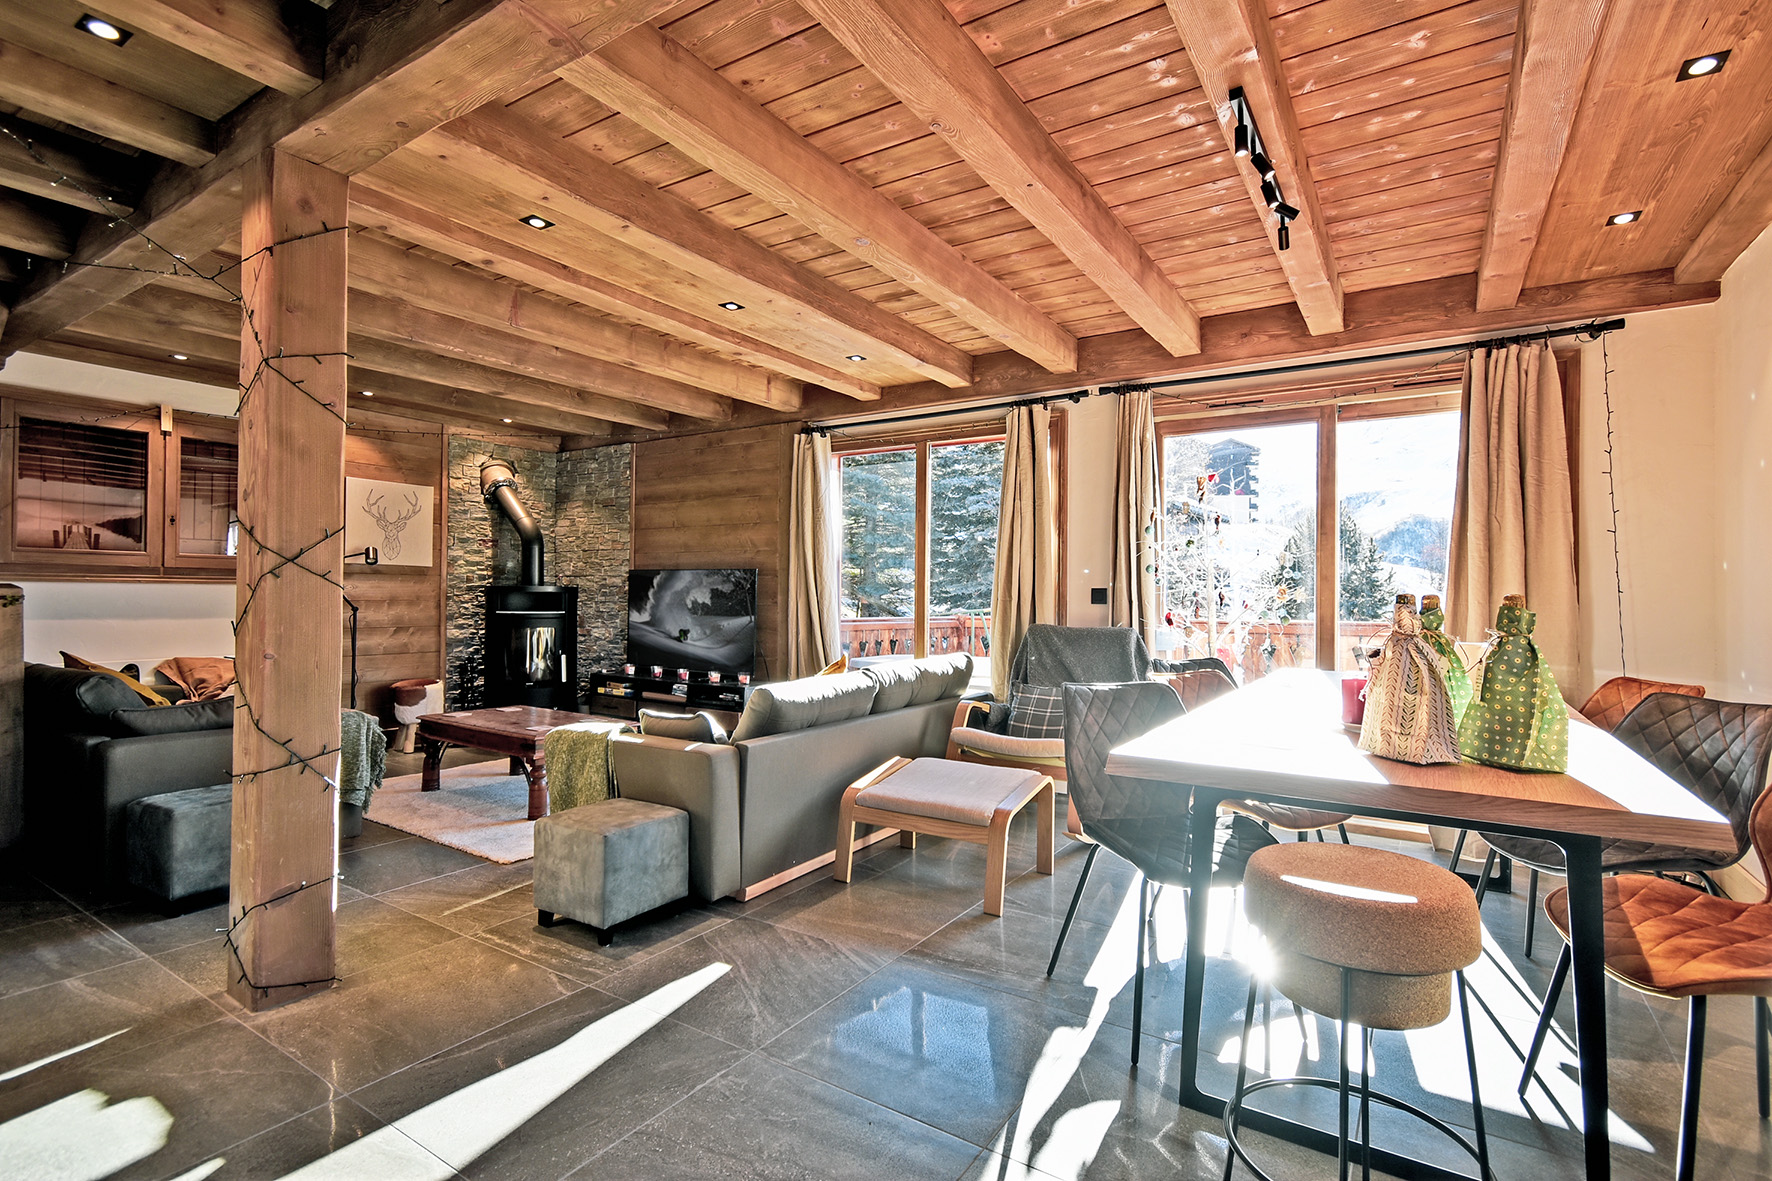 Chalet Marmotte Accommodation in Les Menuires